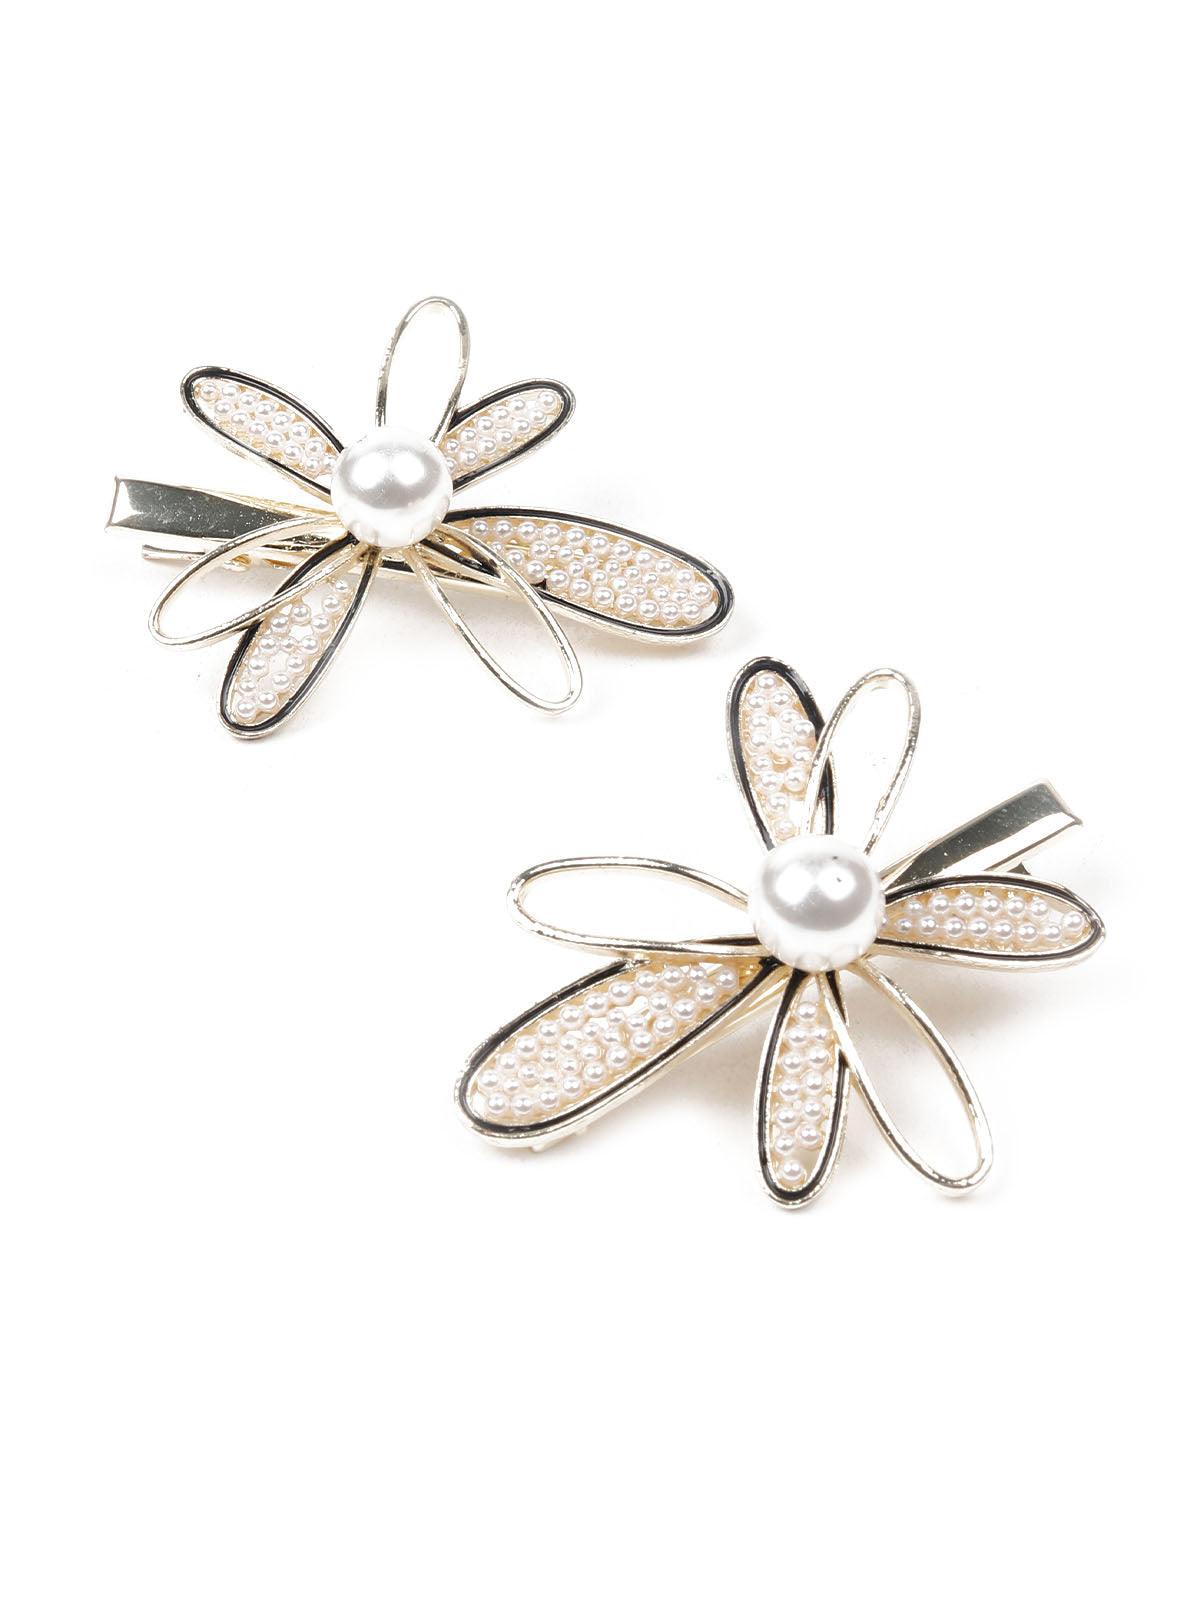 GOLD AND WHITE HAIR CLIP - Odette